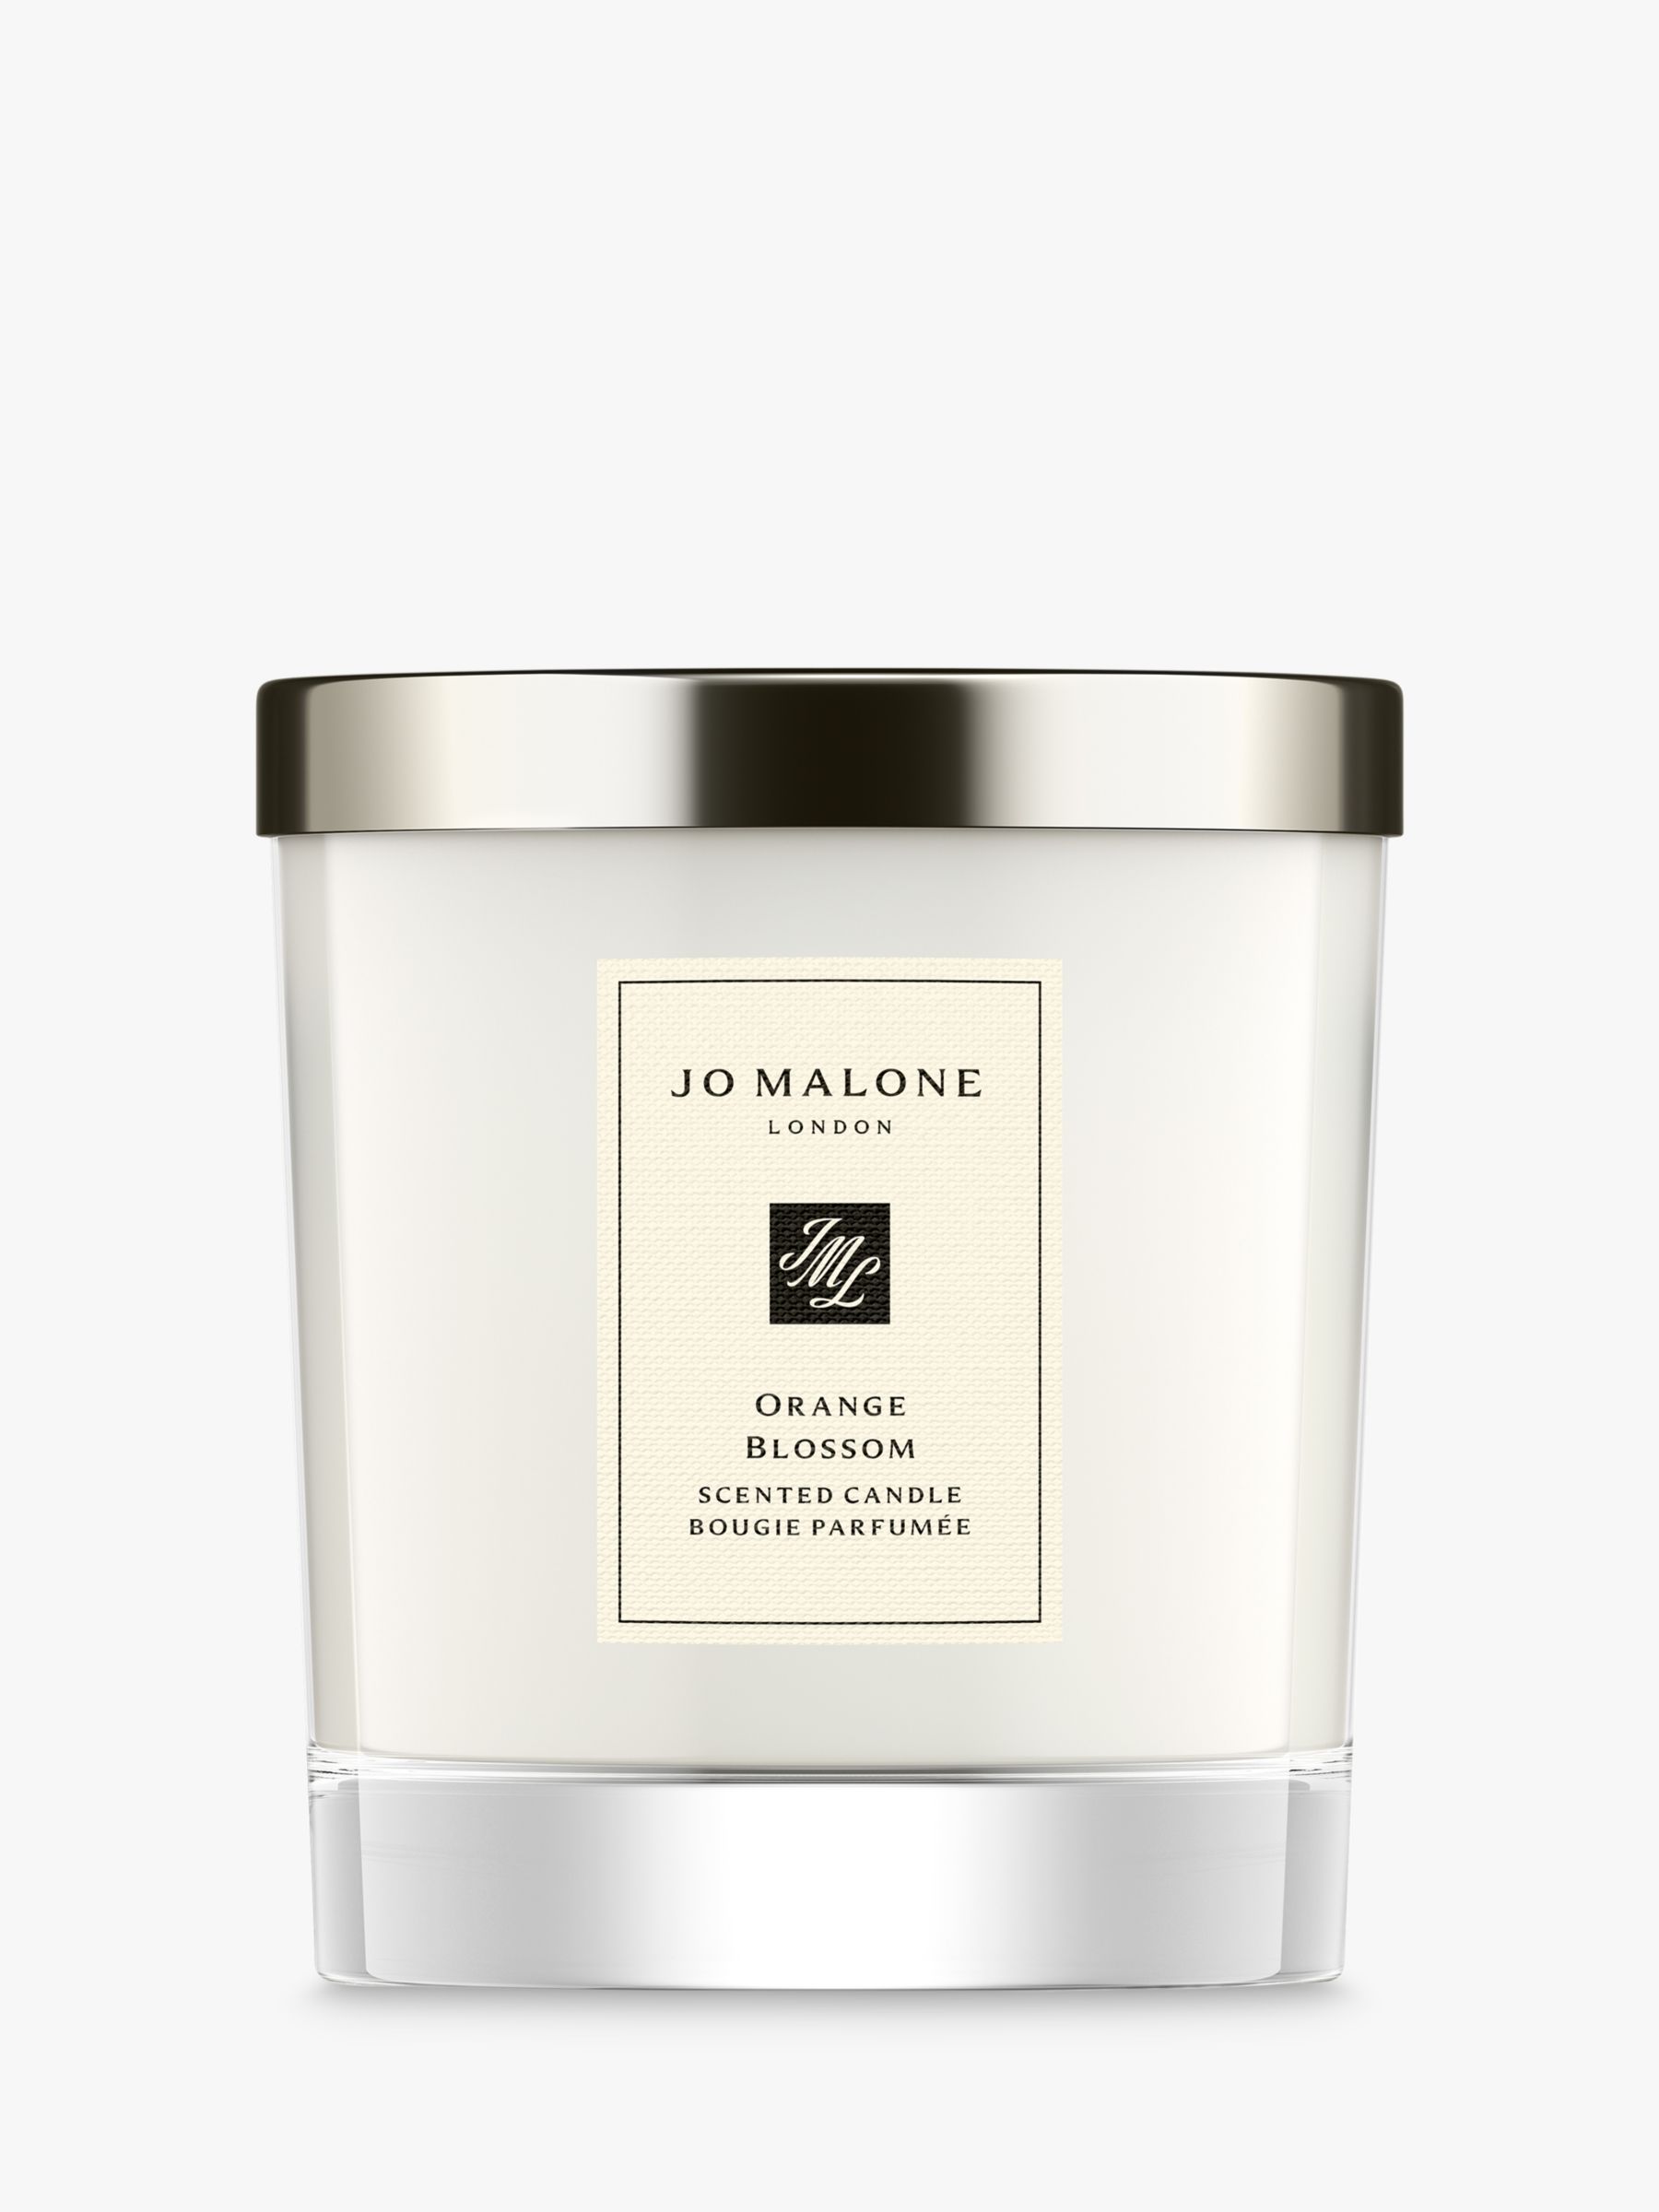 Jo Malone London Orange Blossom Home Scented Candle, 200g at John Lewis ...